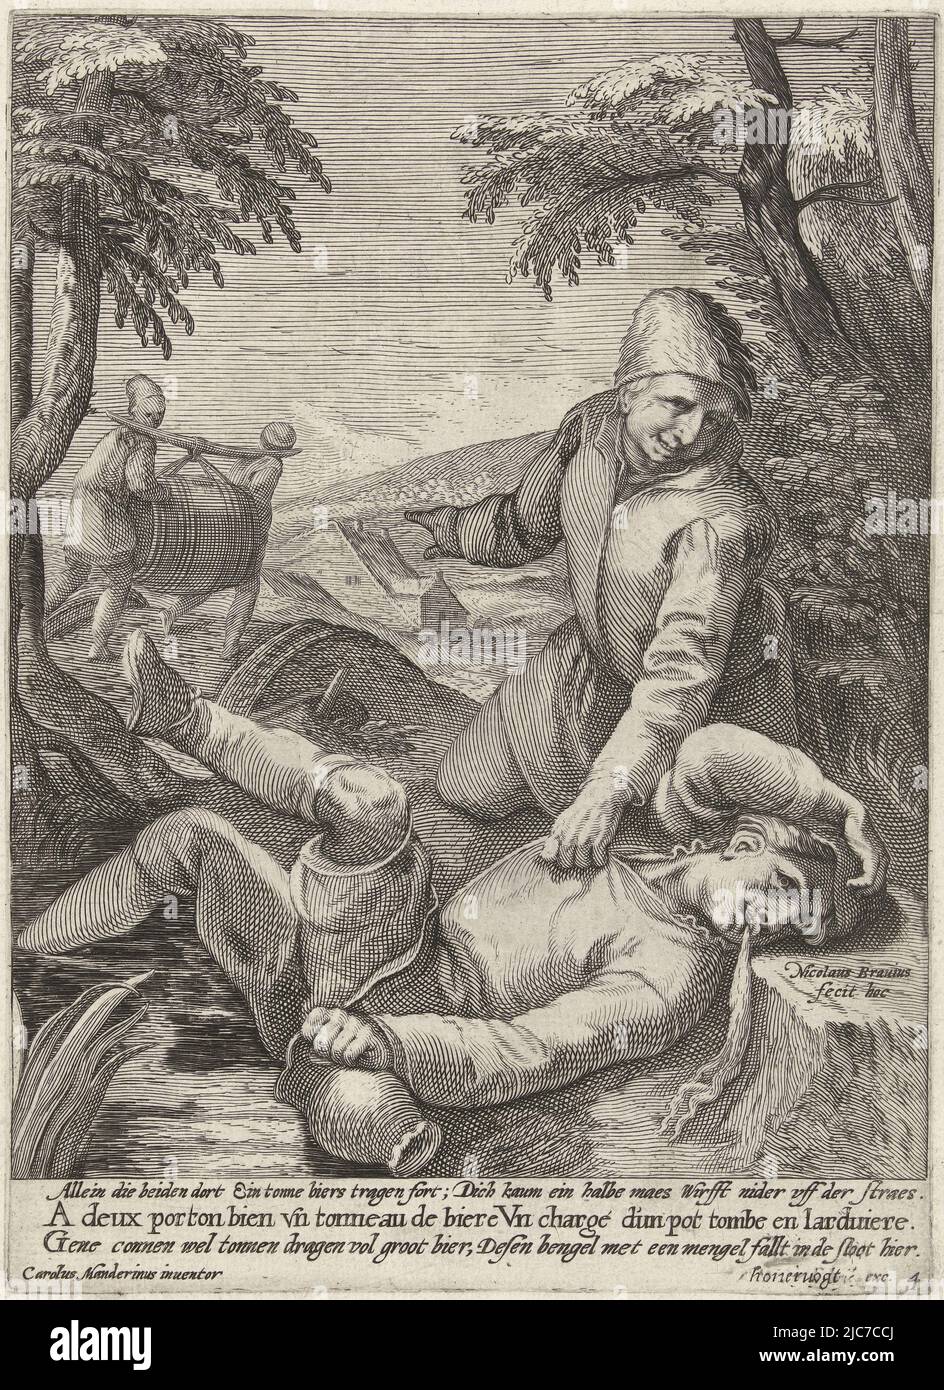 Two men carry a barrel of beer to a pub. In the ditch lies a drunkard with a jug in his hand. A fourth man points out the keg to him. With three lines of caption in German, French and Dutch: Gene connen wel tonnen dragen vol grote bier, Desen bengel met een mengsel fallt in de sloot hier, He is over his beer (?) Four proverbs , print maker: Nicolaas Braeu, (mentioned on object), Karel van Mander (I), (mentioned on object), publisher: Jacques Honervogt (I), (mentioned on object), print maker: Haarlem, Haarlem, publisher: Paris, c. 1608 - c. 1666, paper, engraving, h 235 mm × w 170 mm Stock Photo